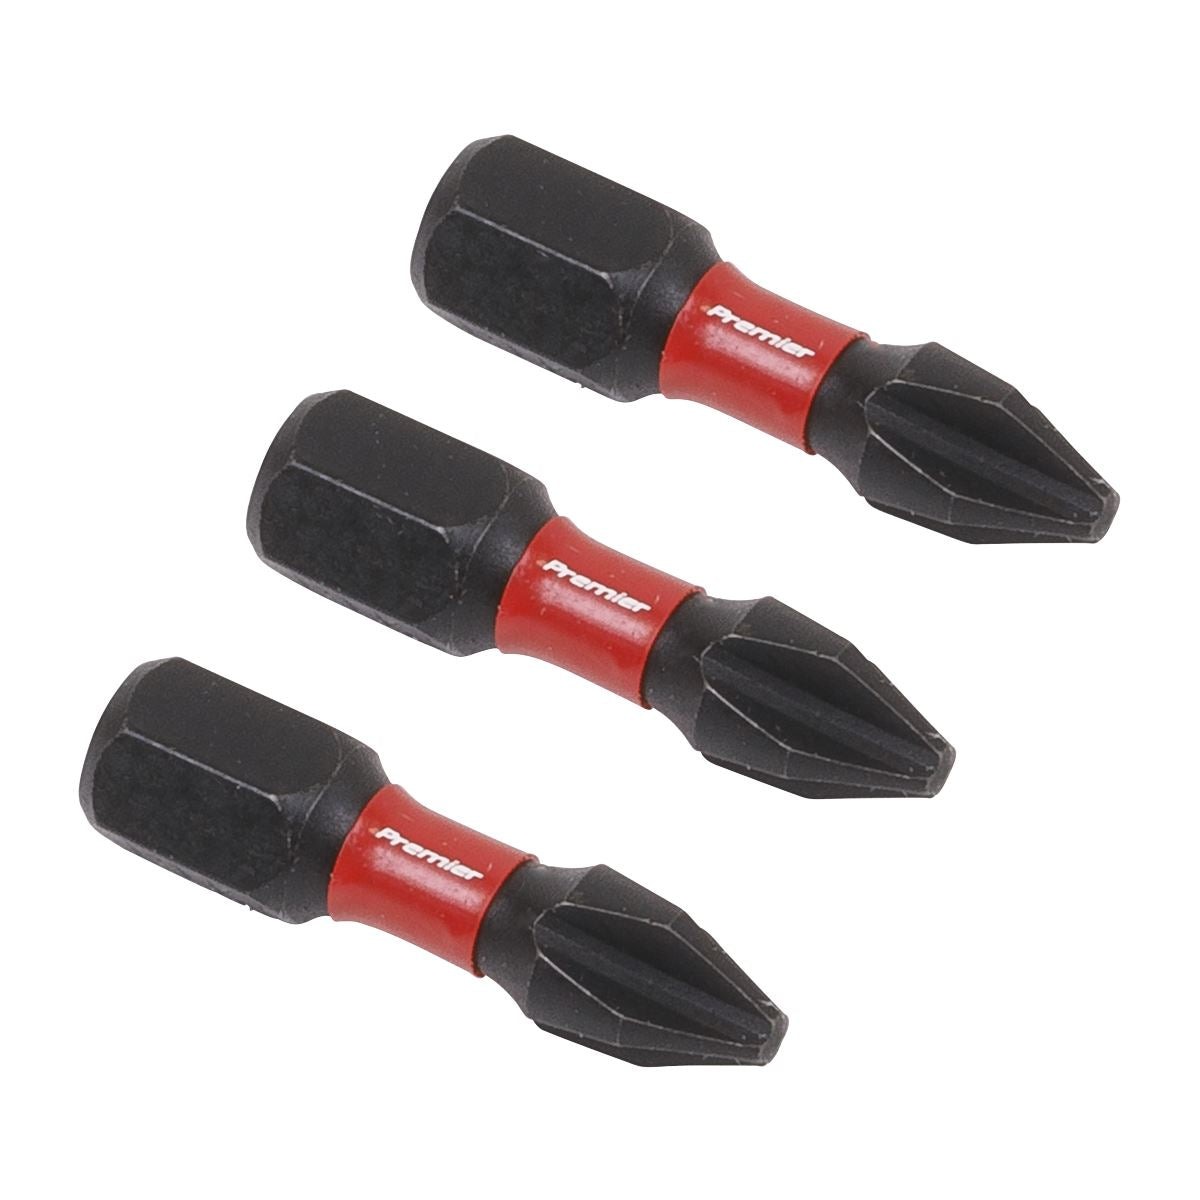 Sealey Premier Phillips #2 Impact Power Tool Bits 25mm - 3pc